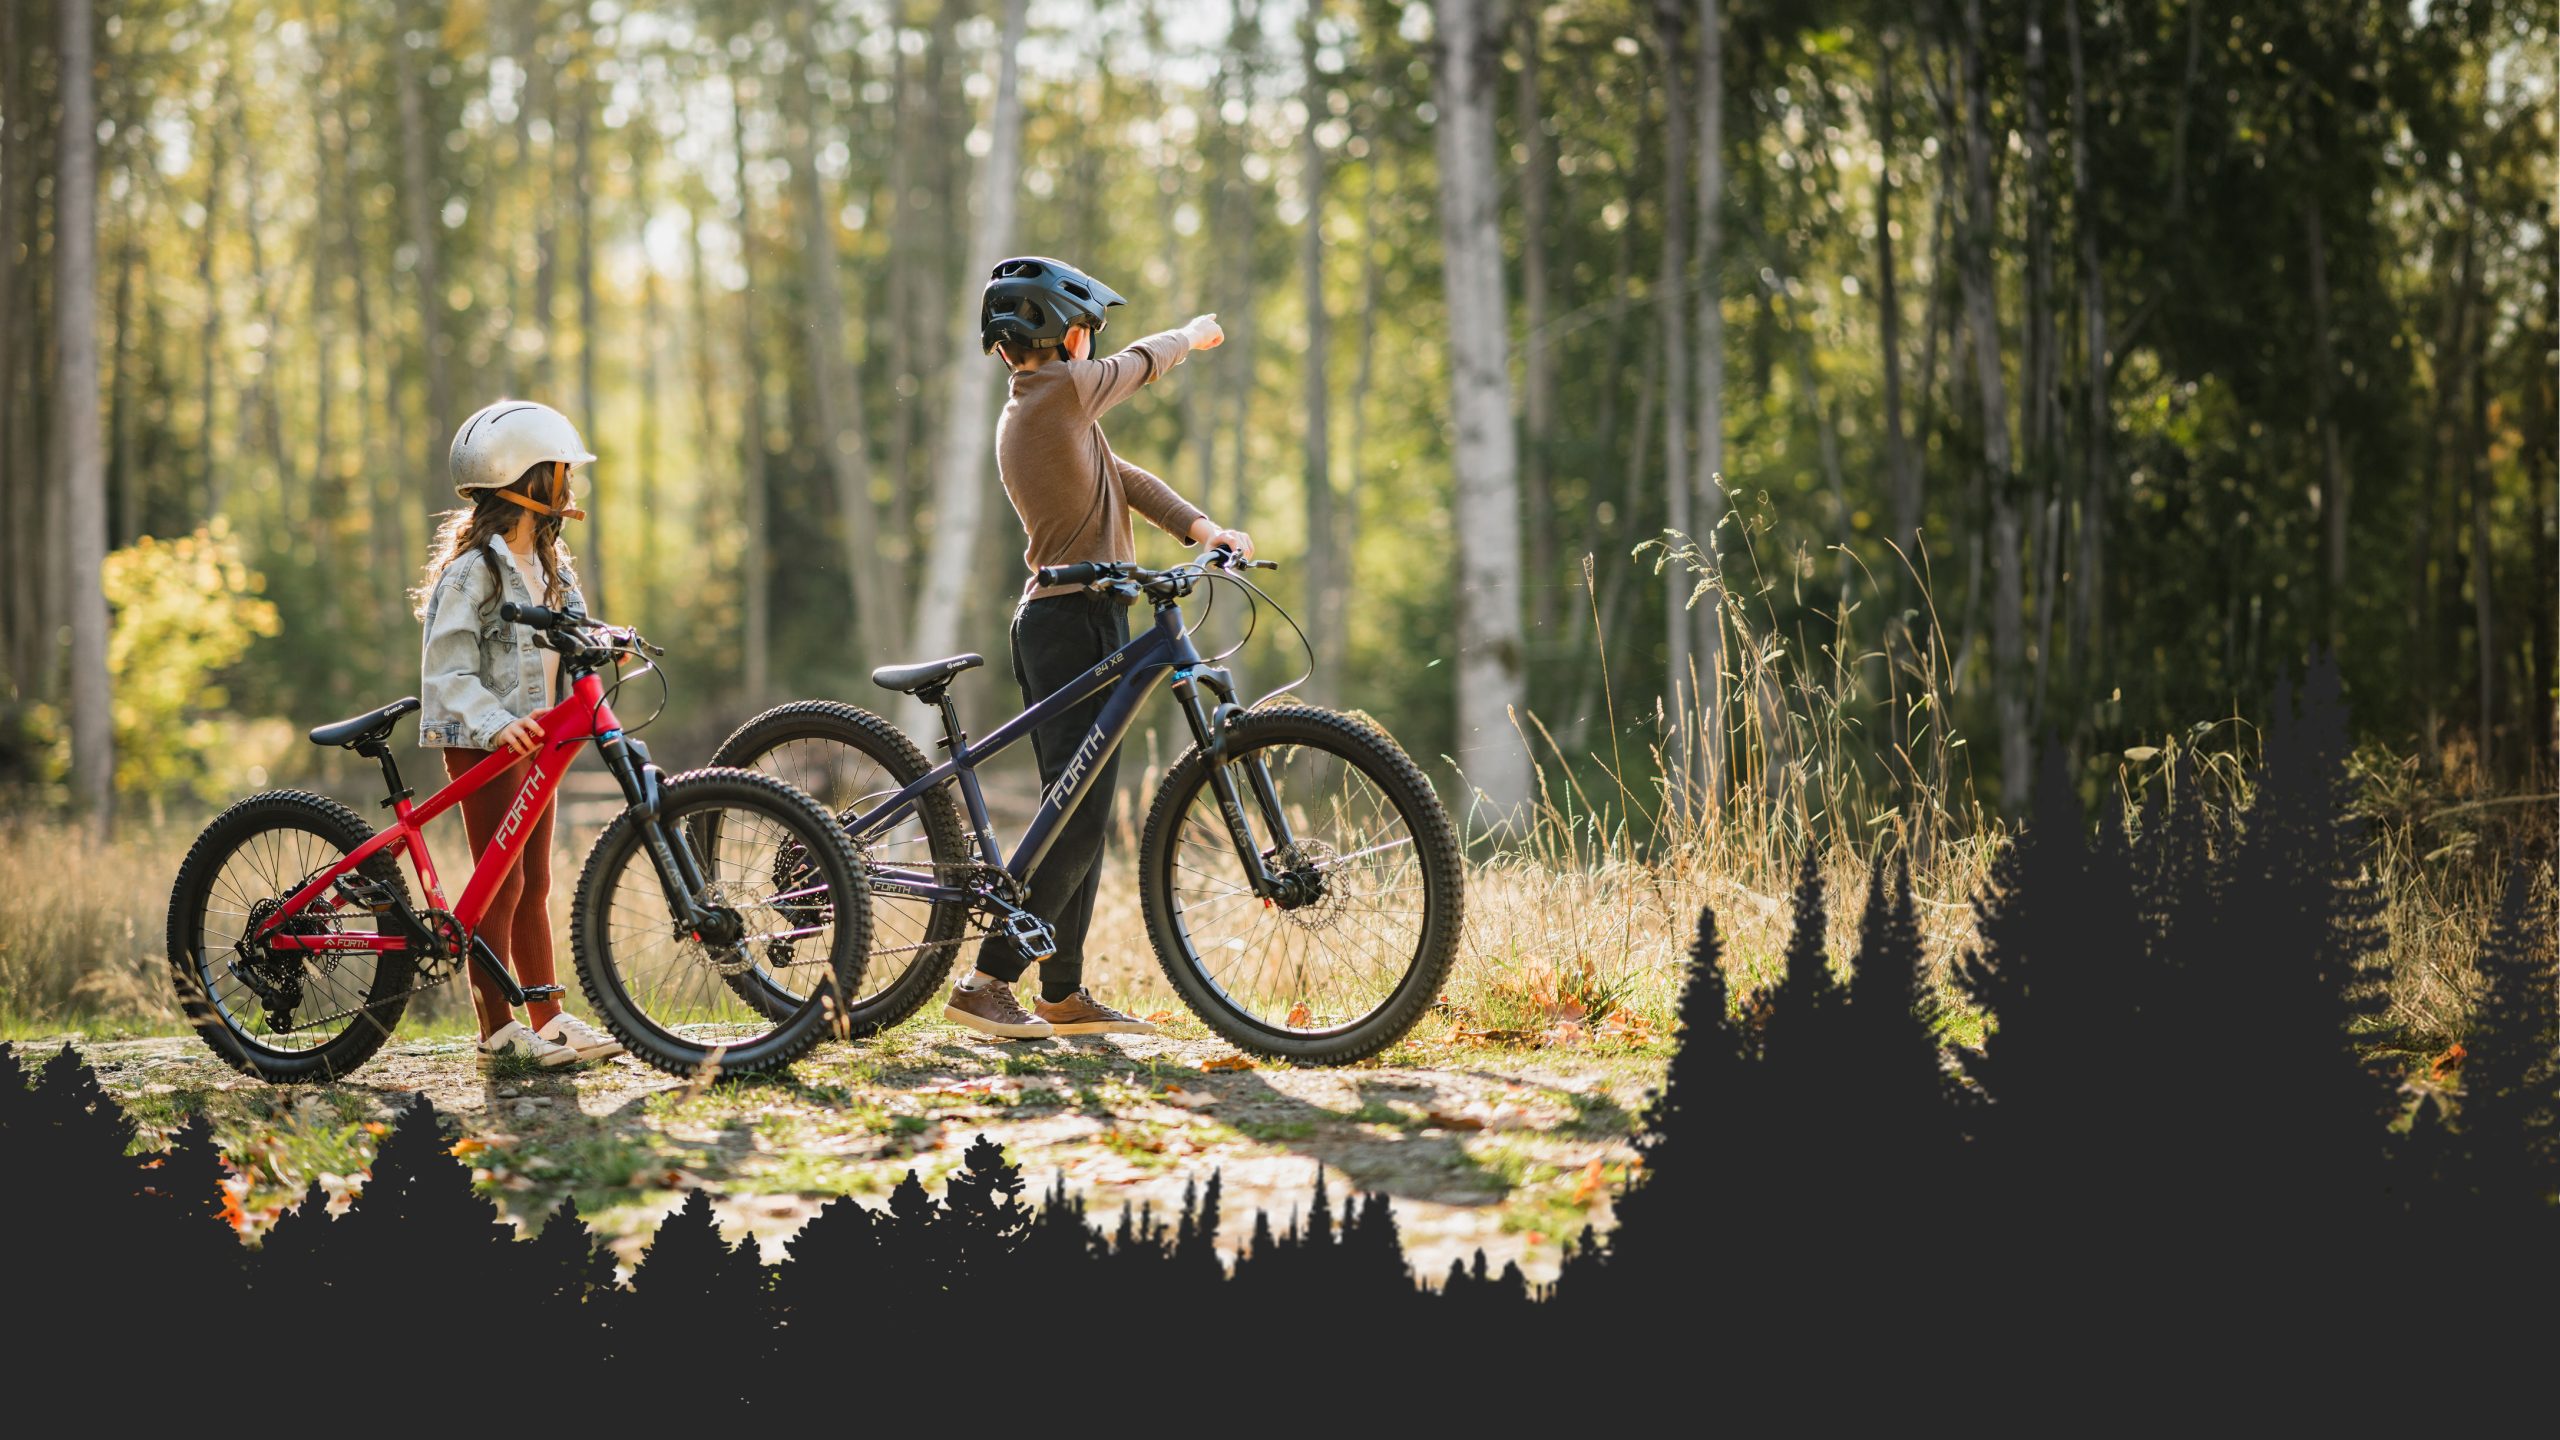 kids in forest with bikes having an adventure